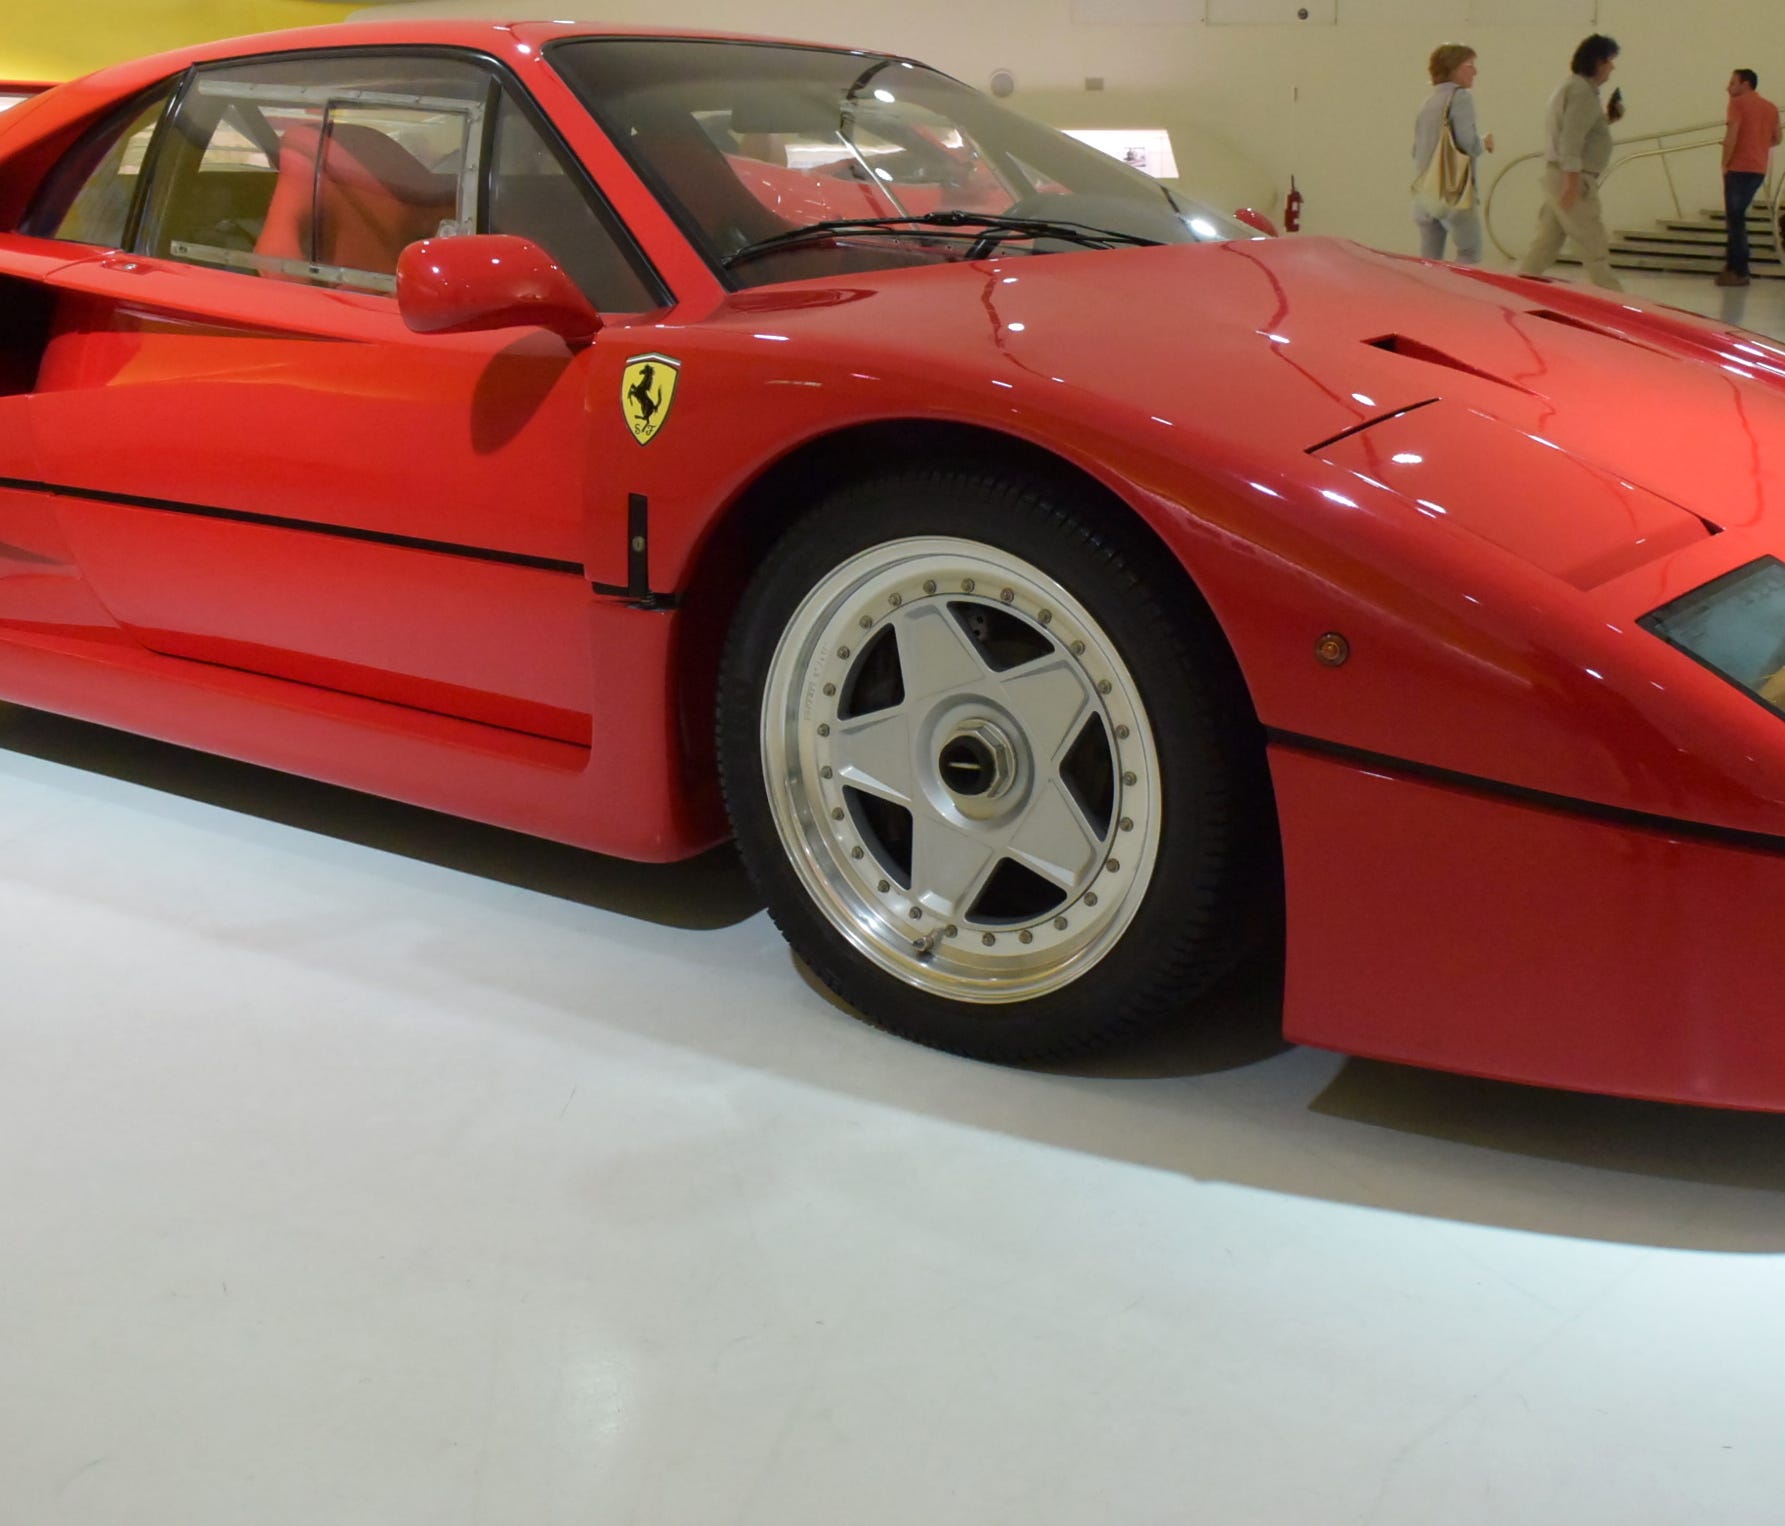 The F40, a road race car, was built in 1987 to celebrate the 40th anniversary of Ferrari. Nick Mason of Pink Floyd, Eric Clapton and Sylvester Stallone are counted among the F40's fans.